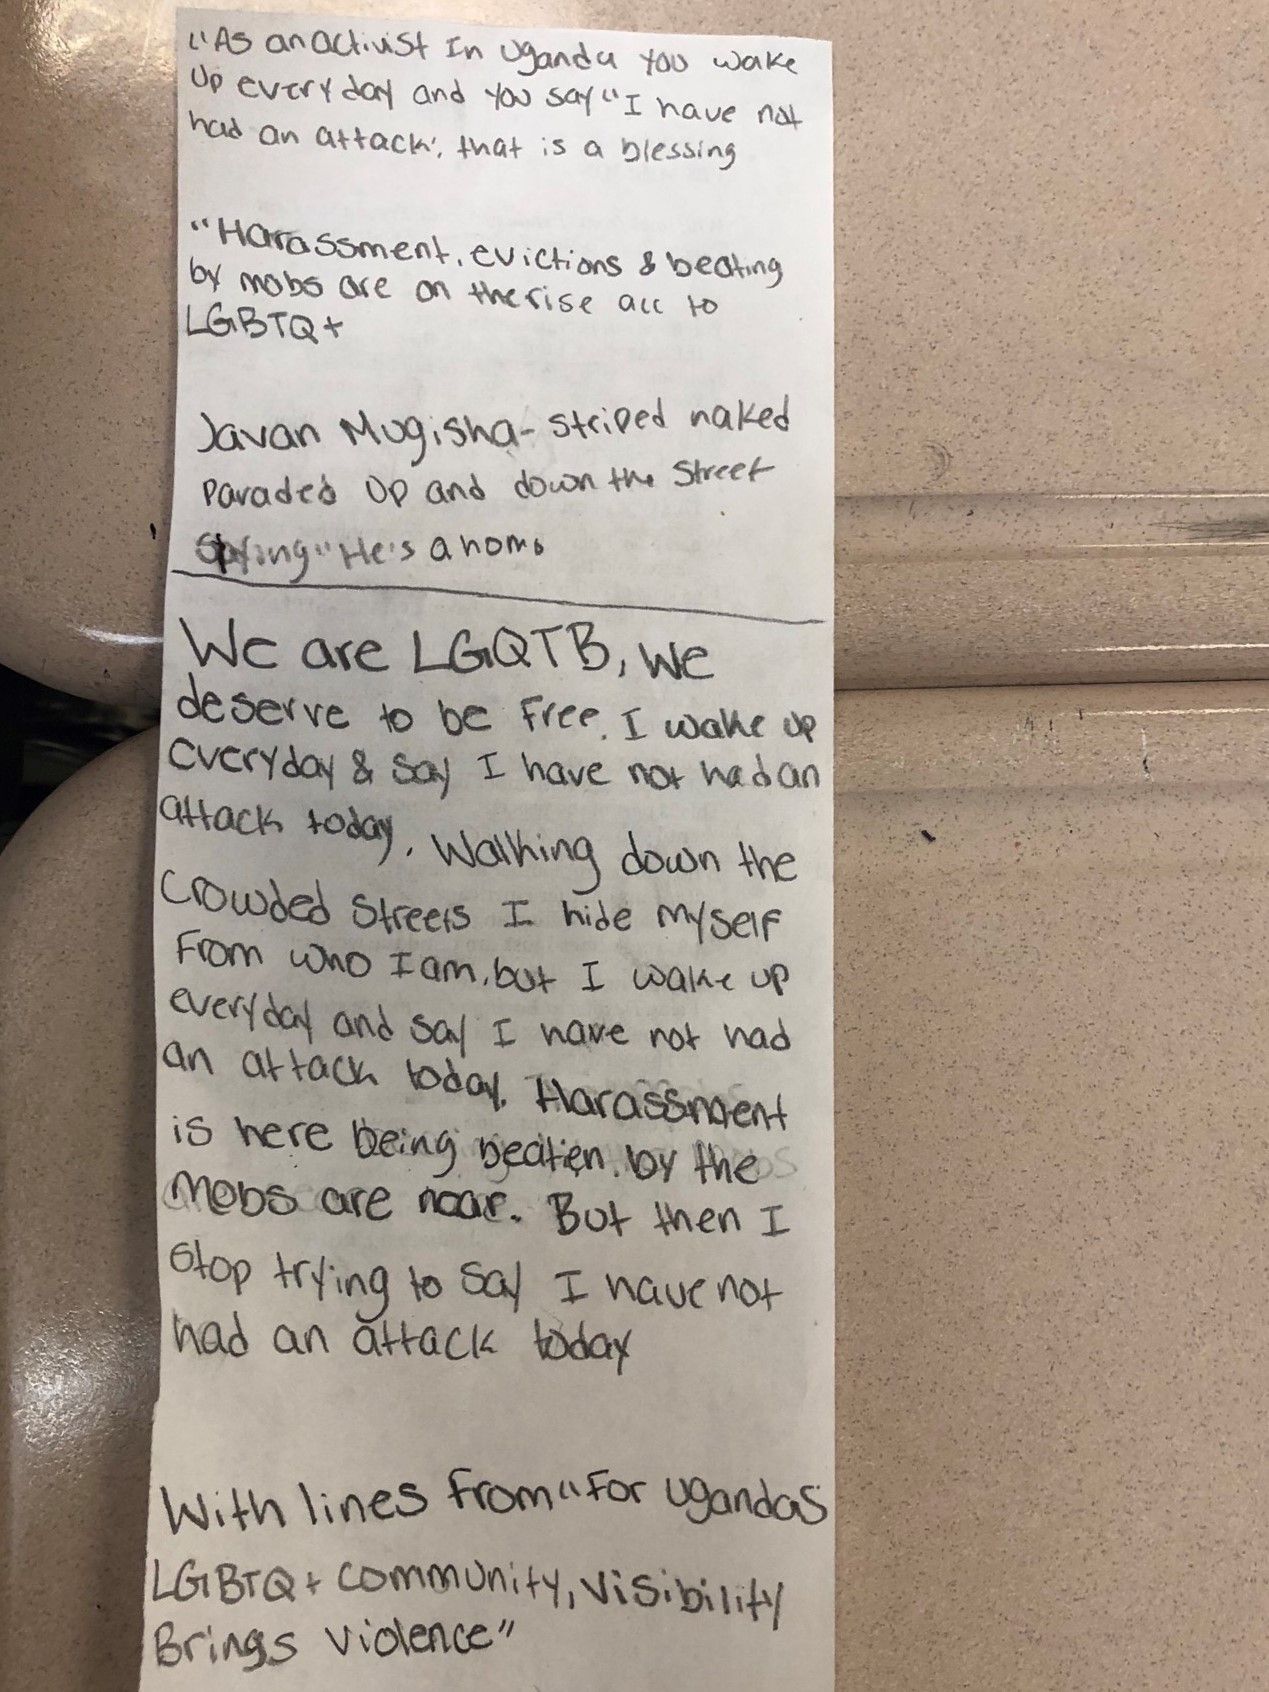 Poem by a 7th grade student at Miles Davis Magnet Academy, written in response to "For Uganda’s LGBTQ+ Community, Visibility Brings Violence" by Jake Naughton. Image by Hannah Berk. United States, 2019.